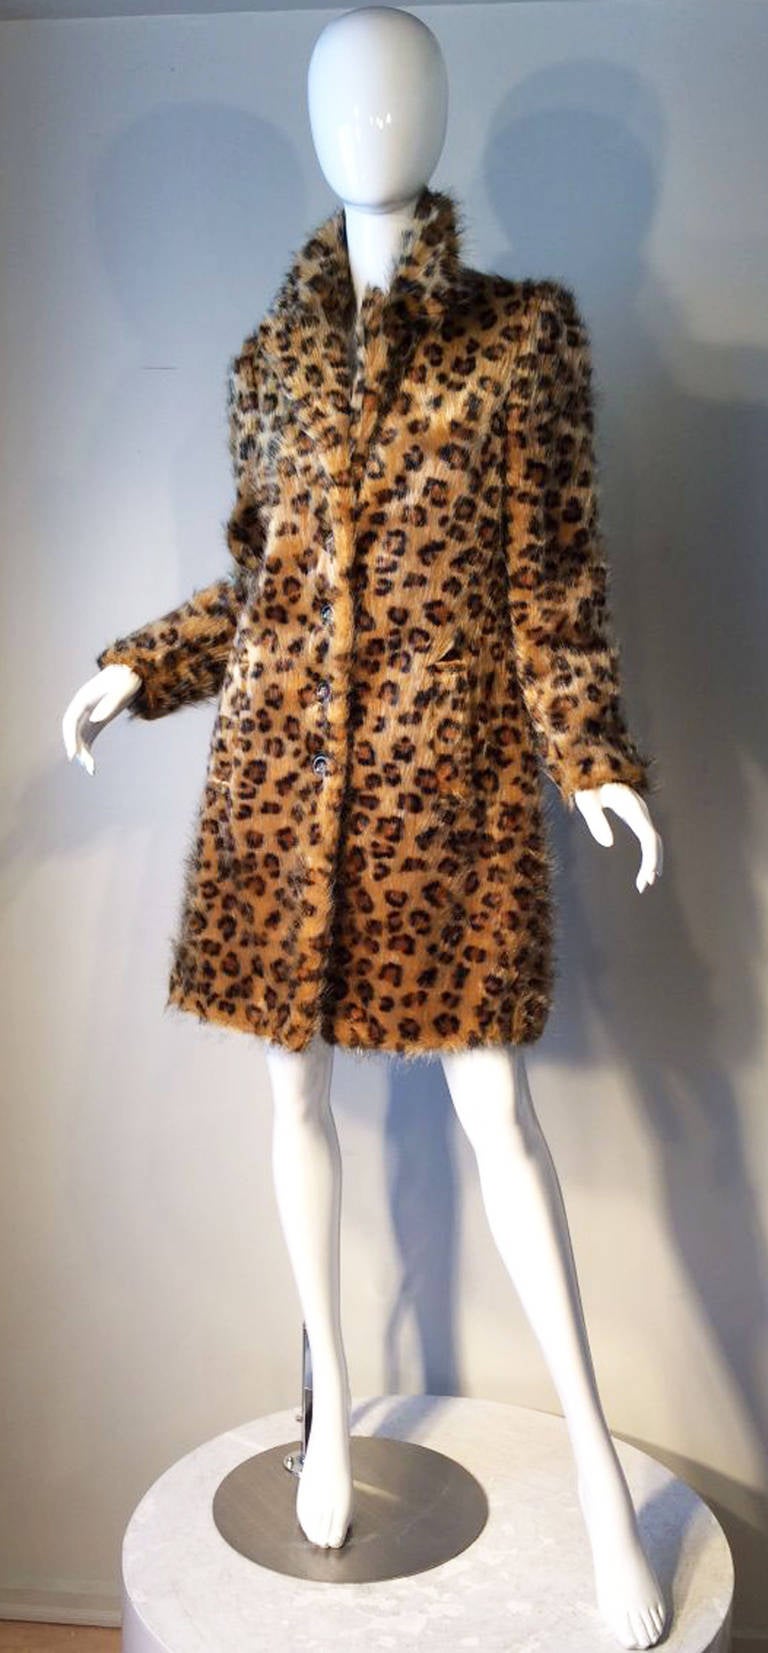 A charming vintage Betsey Johnson faux leopard fur coat. Printed synthetic fiber item fully lined with button front closures and side pockets. Pristine appears unworn.